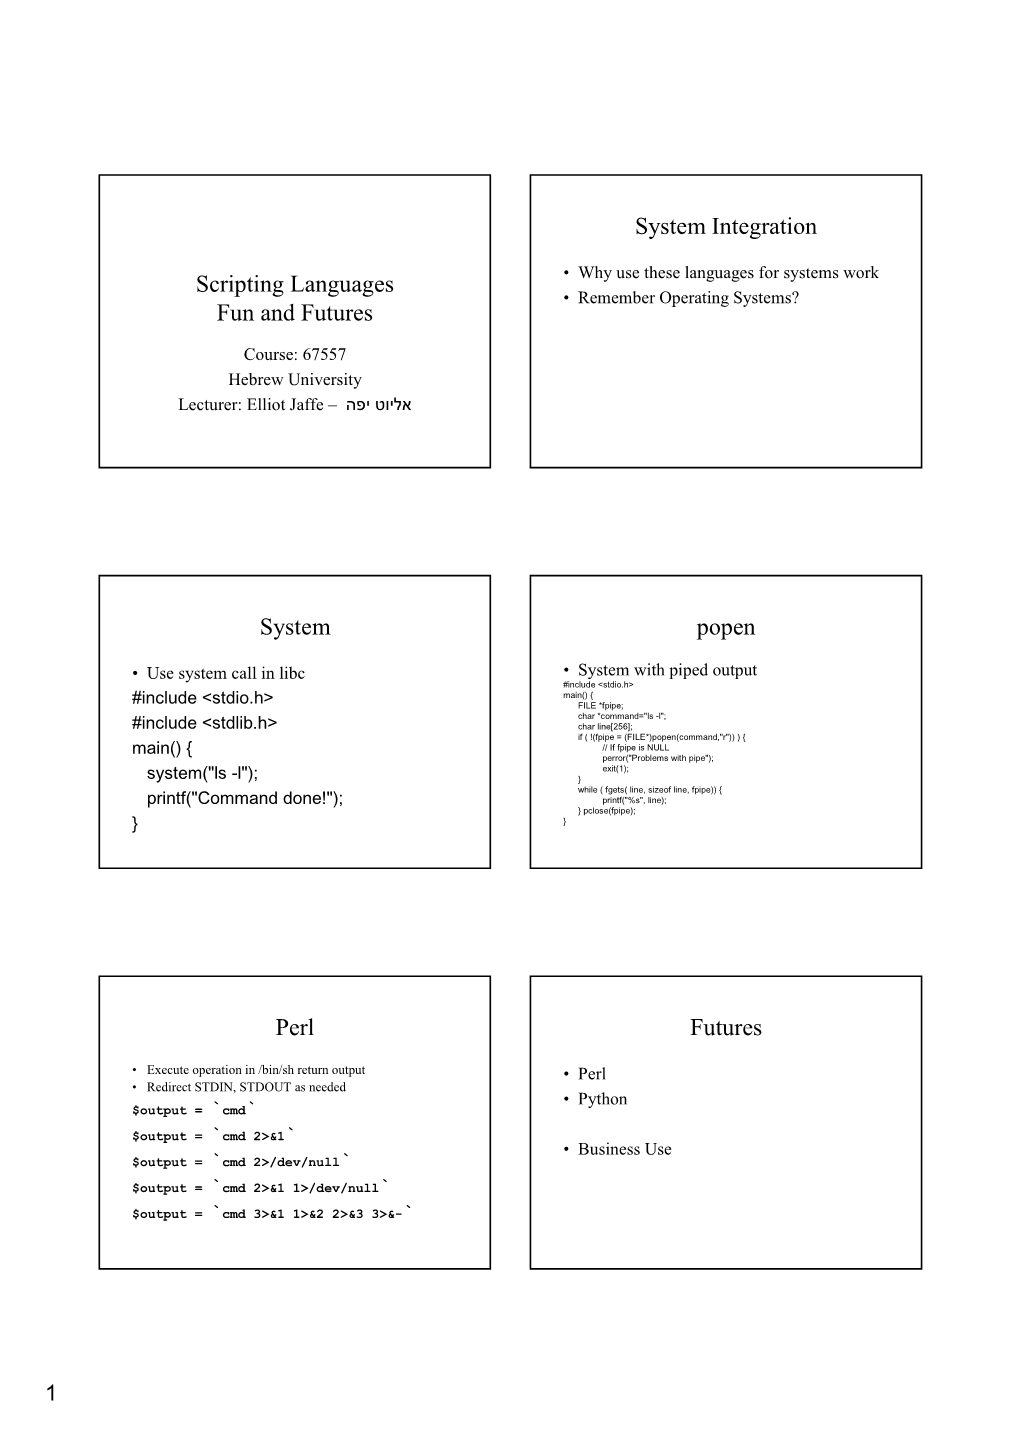 Scripting Languages Fun and Futures System Integration System Popen Perl Futures